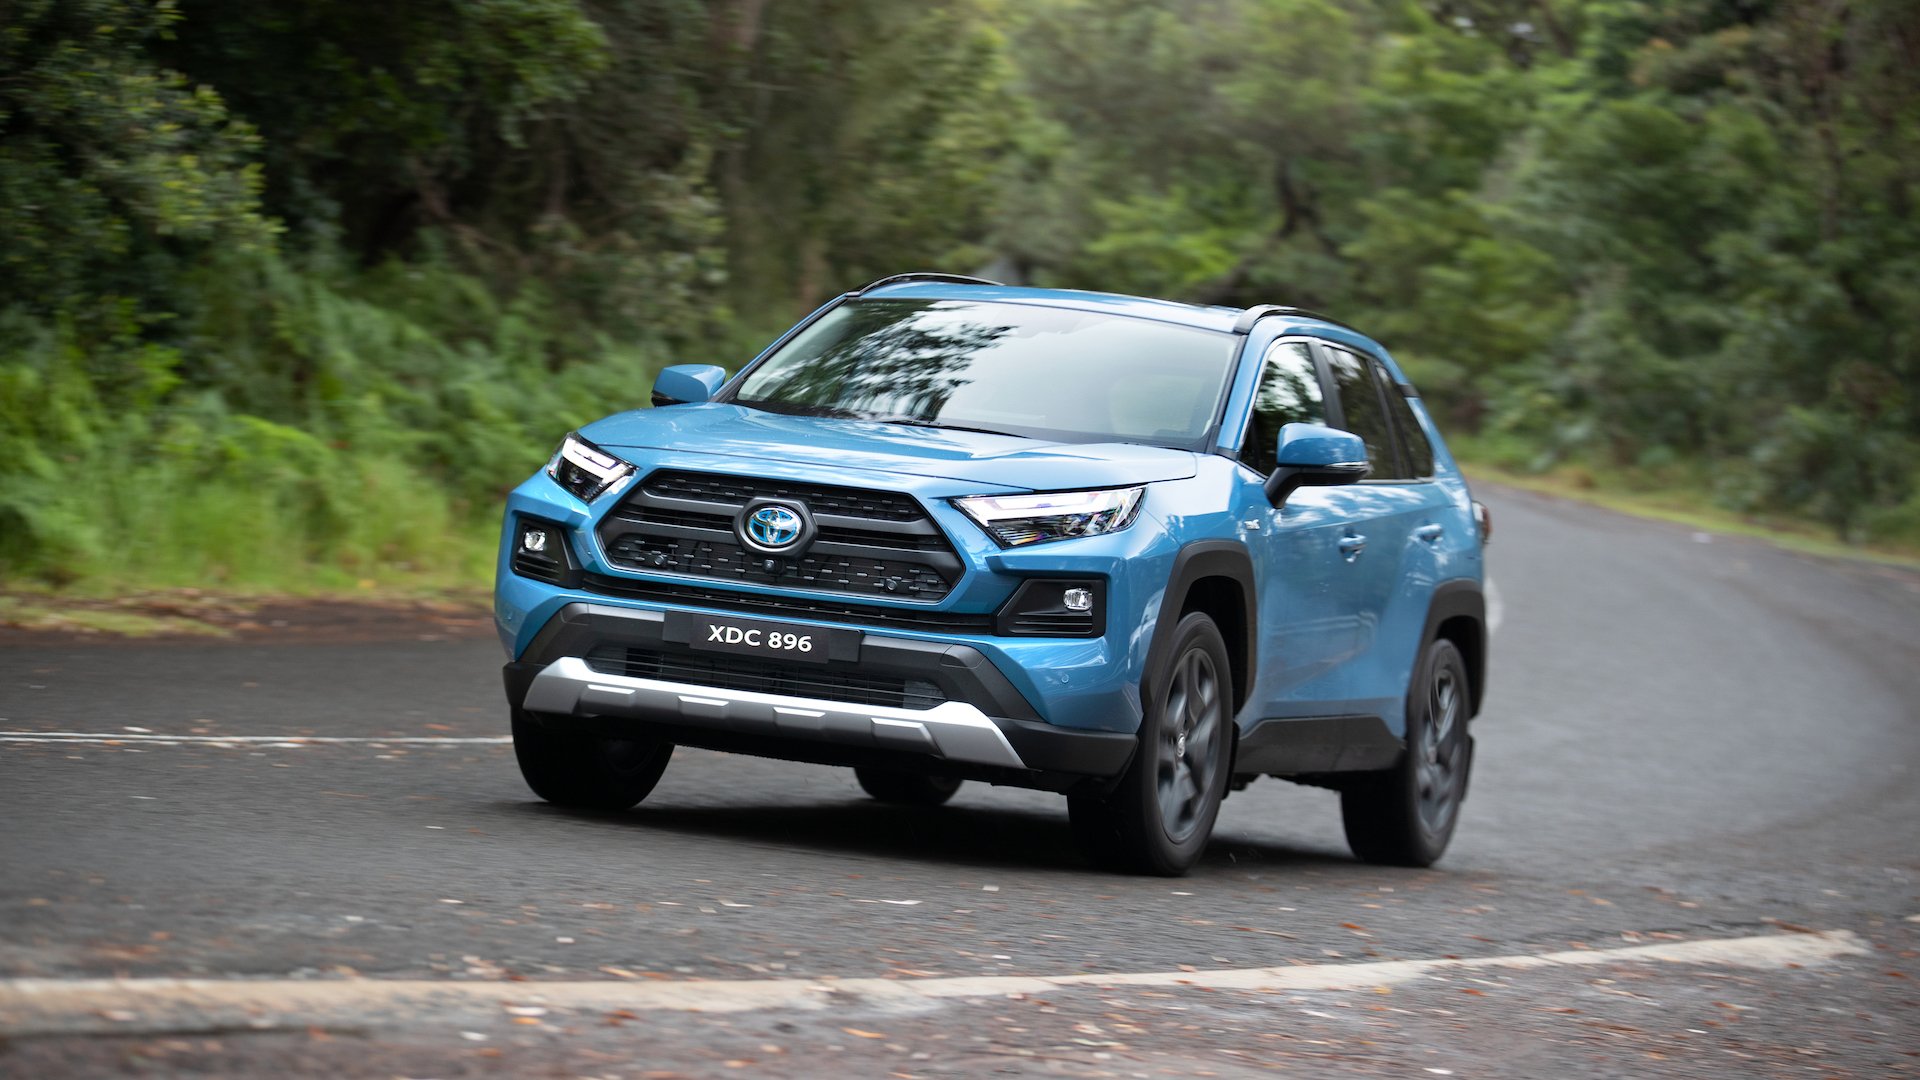 Toyota Upgrades RAV4 Range with Improvements to Safety and Technology